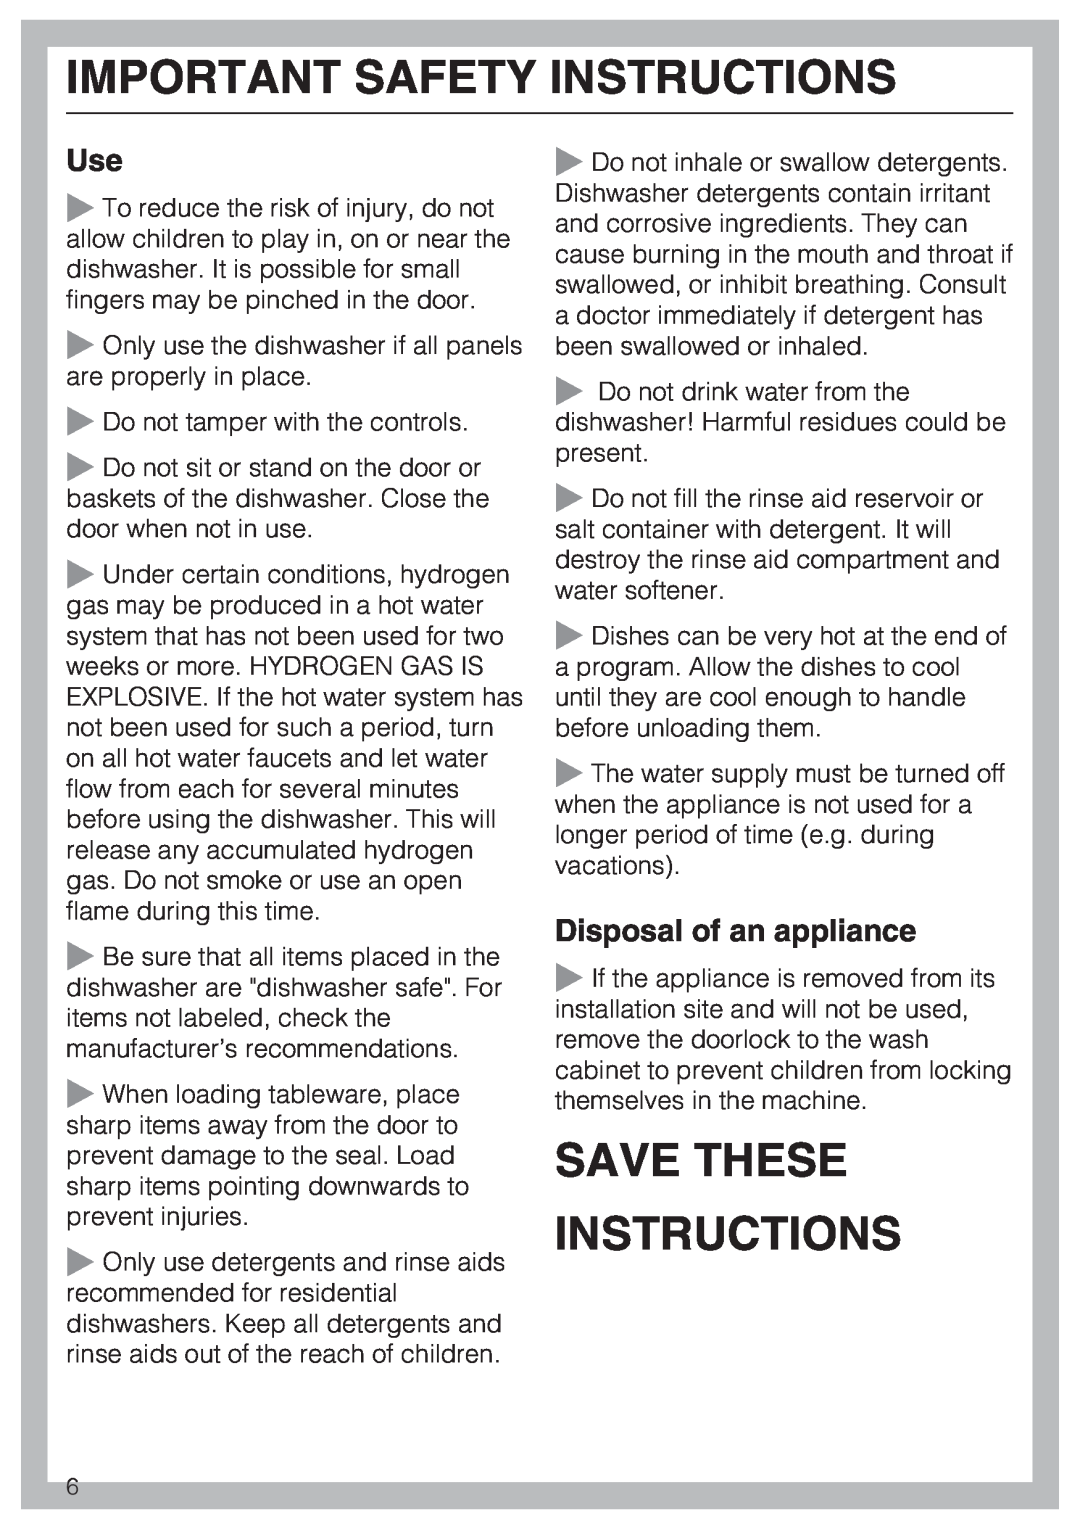 Miele G 5570, G 5575 operating instructions Save These Instructions, Disposal of an appliance, Important Safety Instructions 